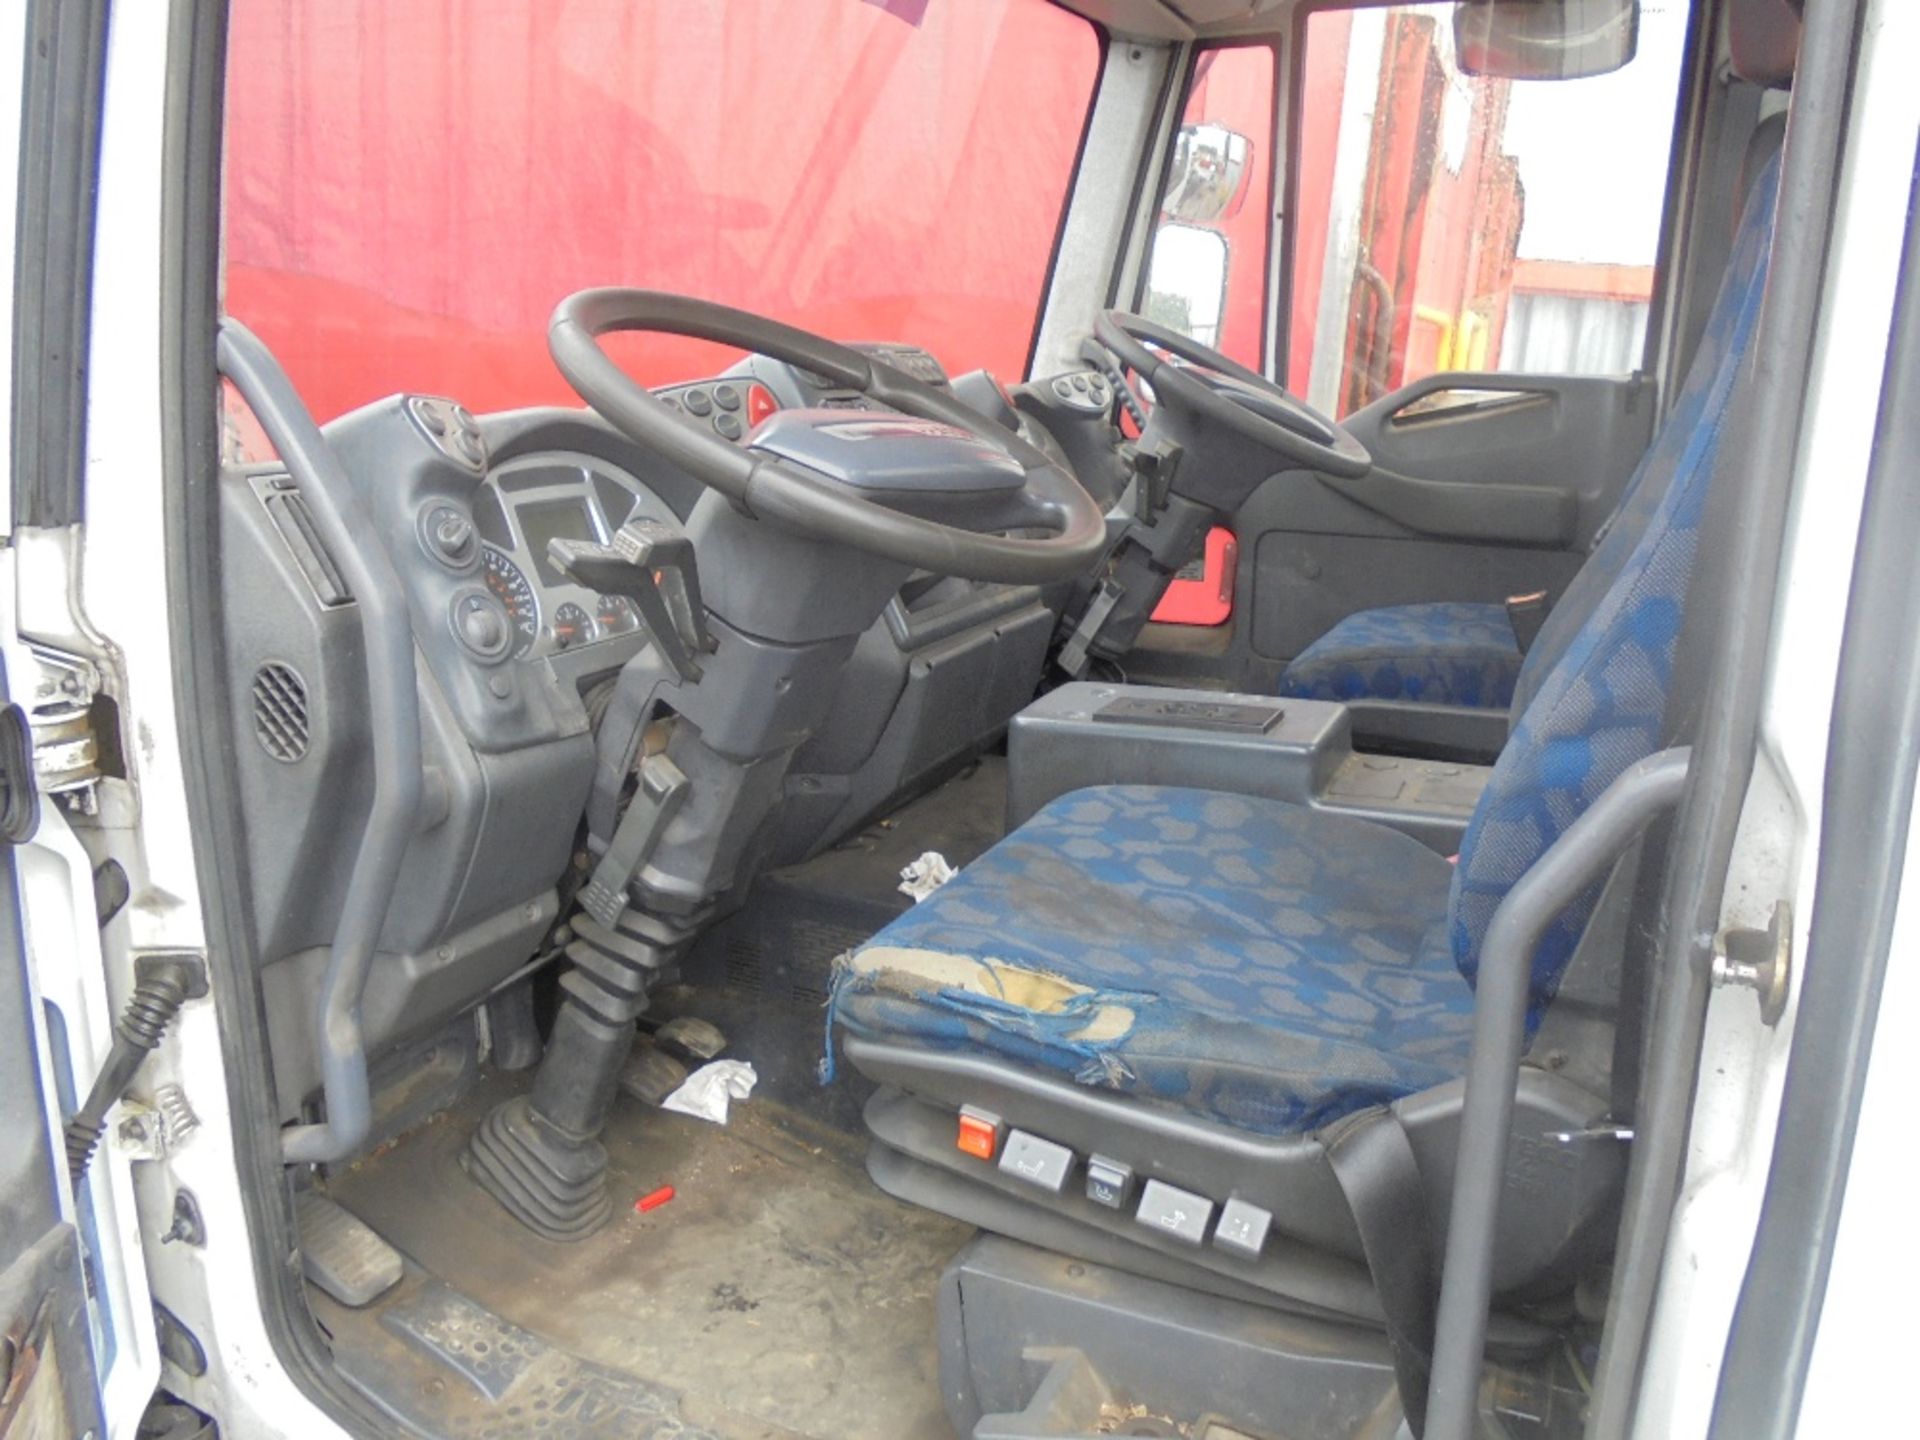 Iveco 150E21 Dual Steer Chassis Cab, Registration No. RX05 NTN, First Registered: 2005 - Image 3 of 3